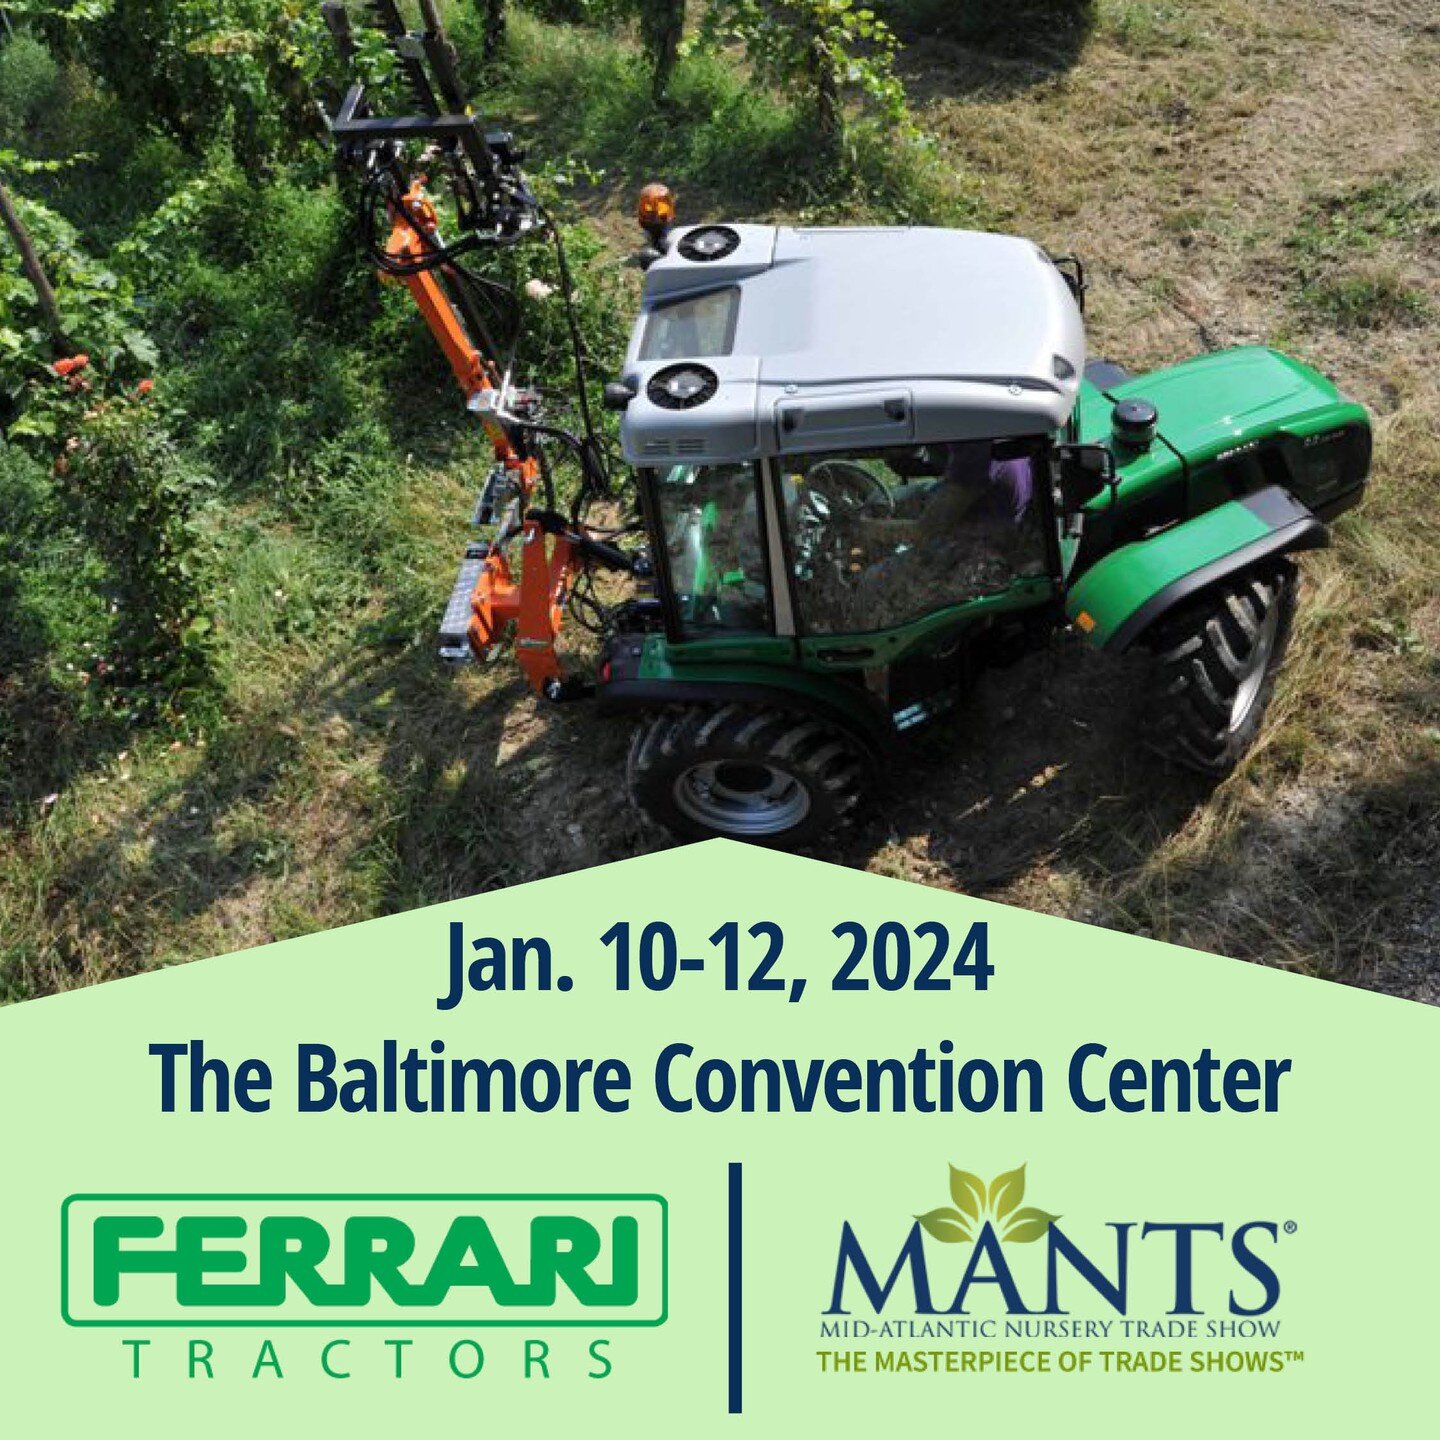 Next week, Ferrari Tractors will be on display at the 2024 @mantsbaltimore Mid-Atlantic Nursery Tradeshow! We'll be sharing Booth 2650 with @bcs_america. Stop by and learn how BCS &amp; Ferrari can grow your farm or nursery!
.
#ferrari #ferraritracto